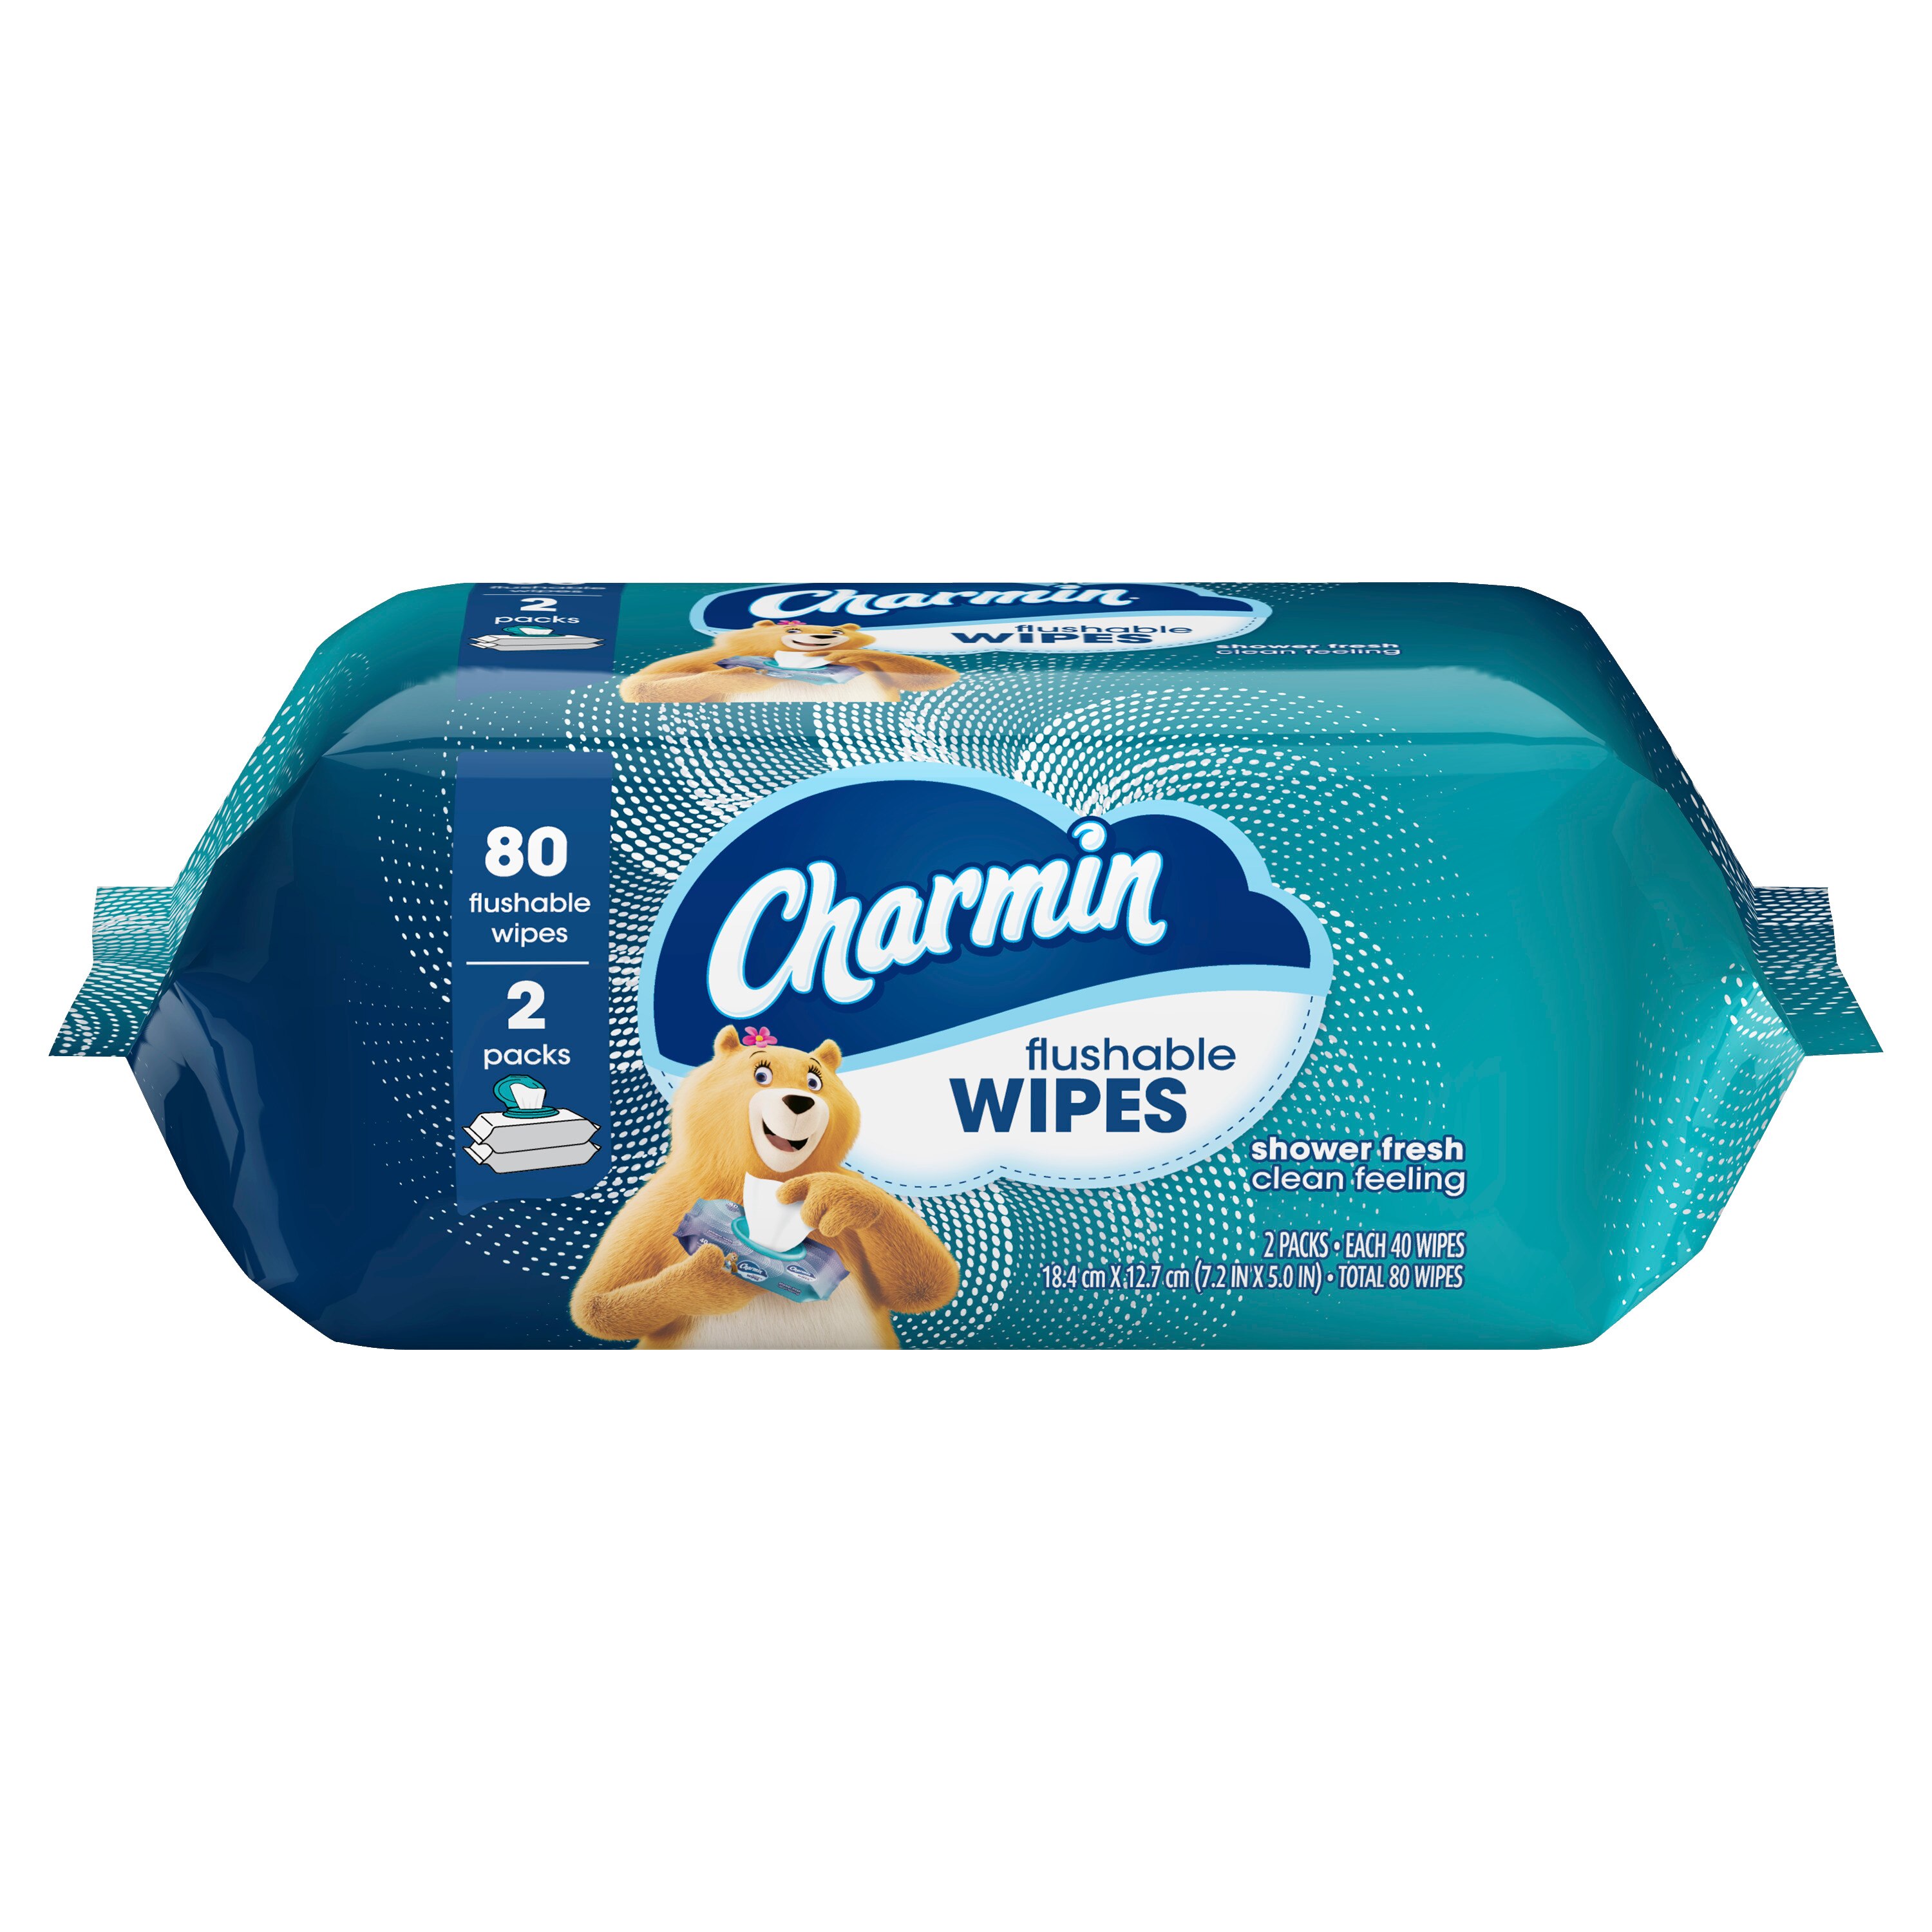 Charmin Flushable Wipes, 2 Packs, 40 Wipes Per Pack, 80 Total Wipes - 80 Ct , CVS